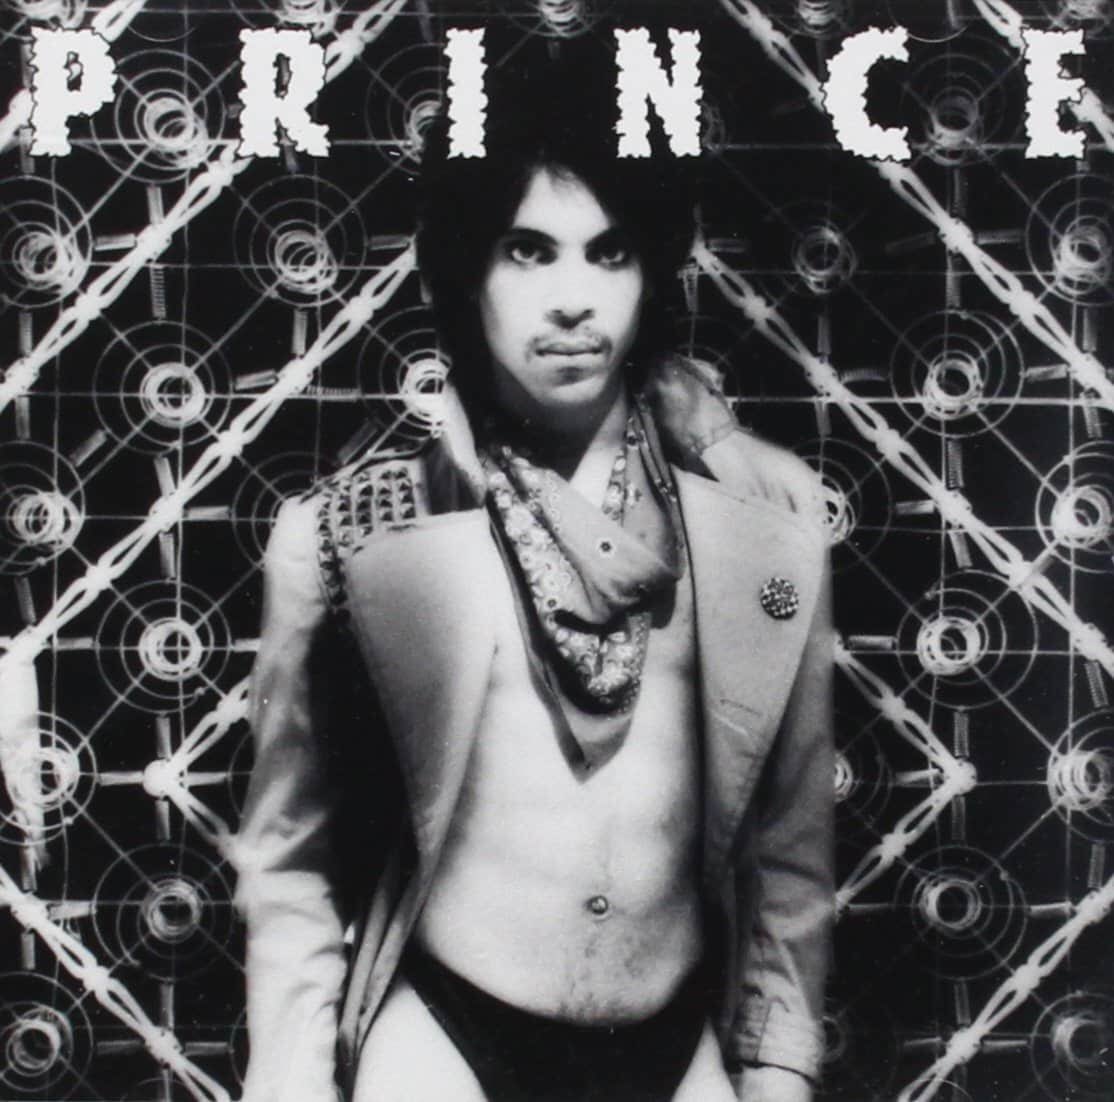 While clad in thigh highs and a piercing gaze, Prince stood in front of mattress springs on the 'Dirty Mind' album cover; boldly daring his audience to come along on his bumpy ride through the dark side of sex, obsession, lust & more.